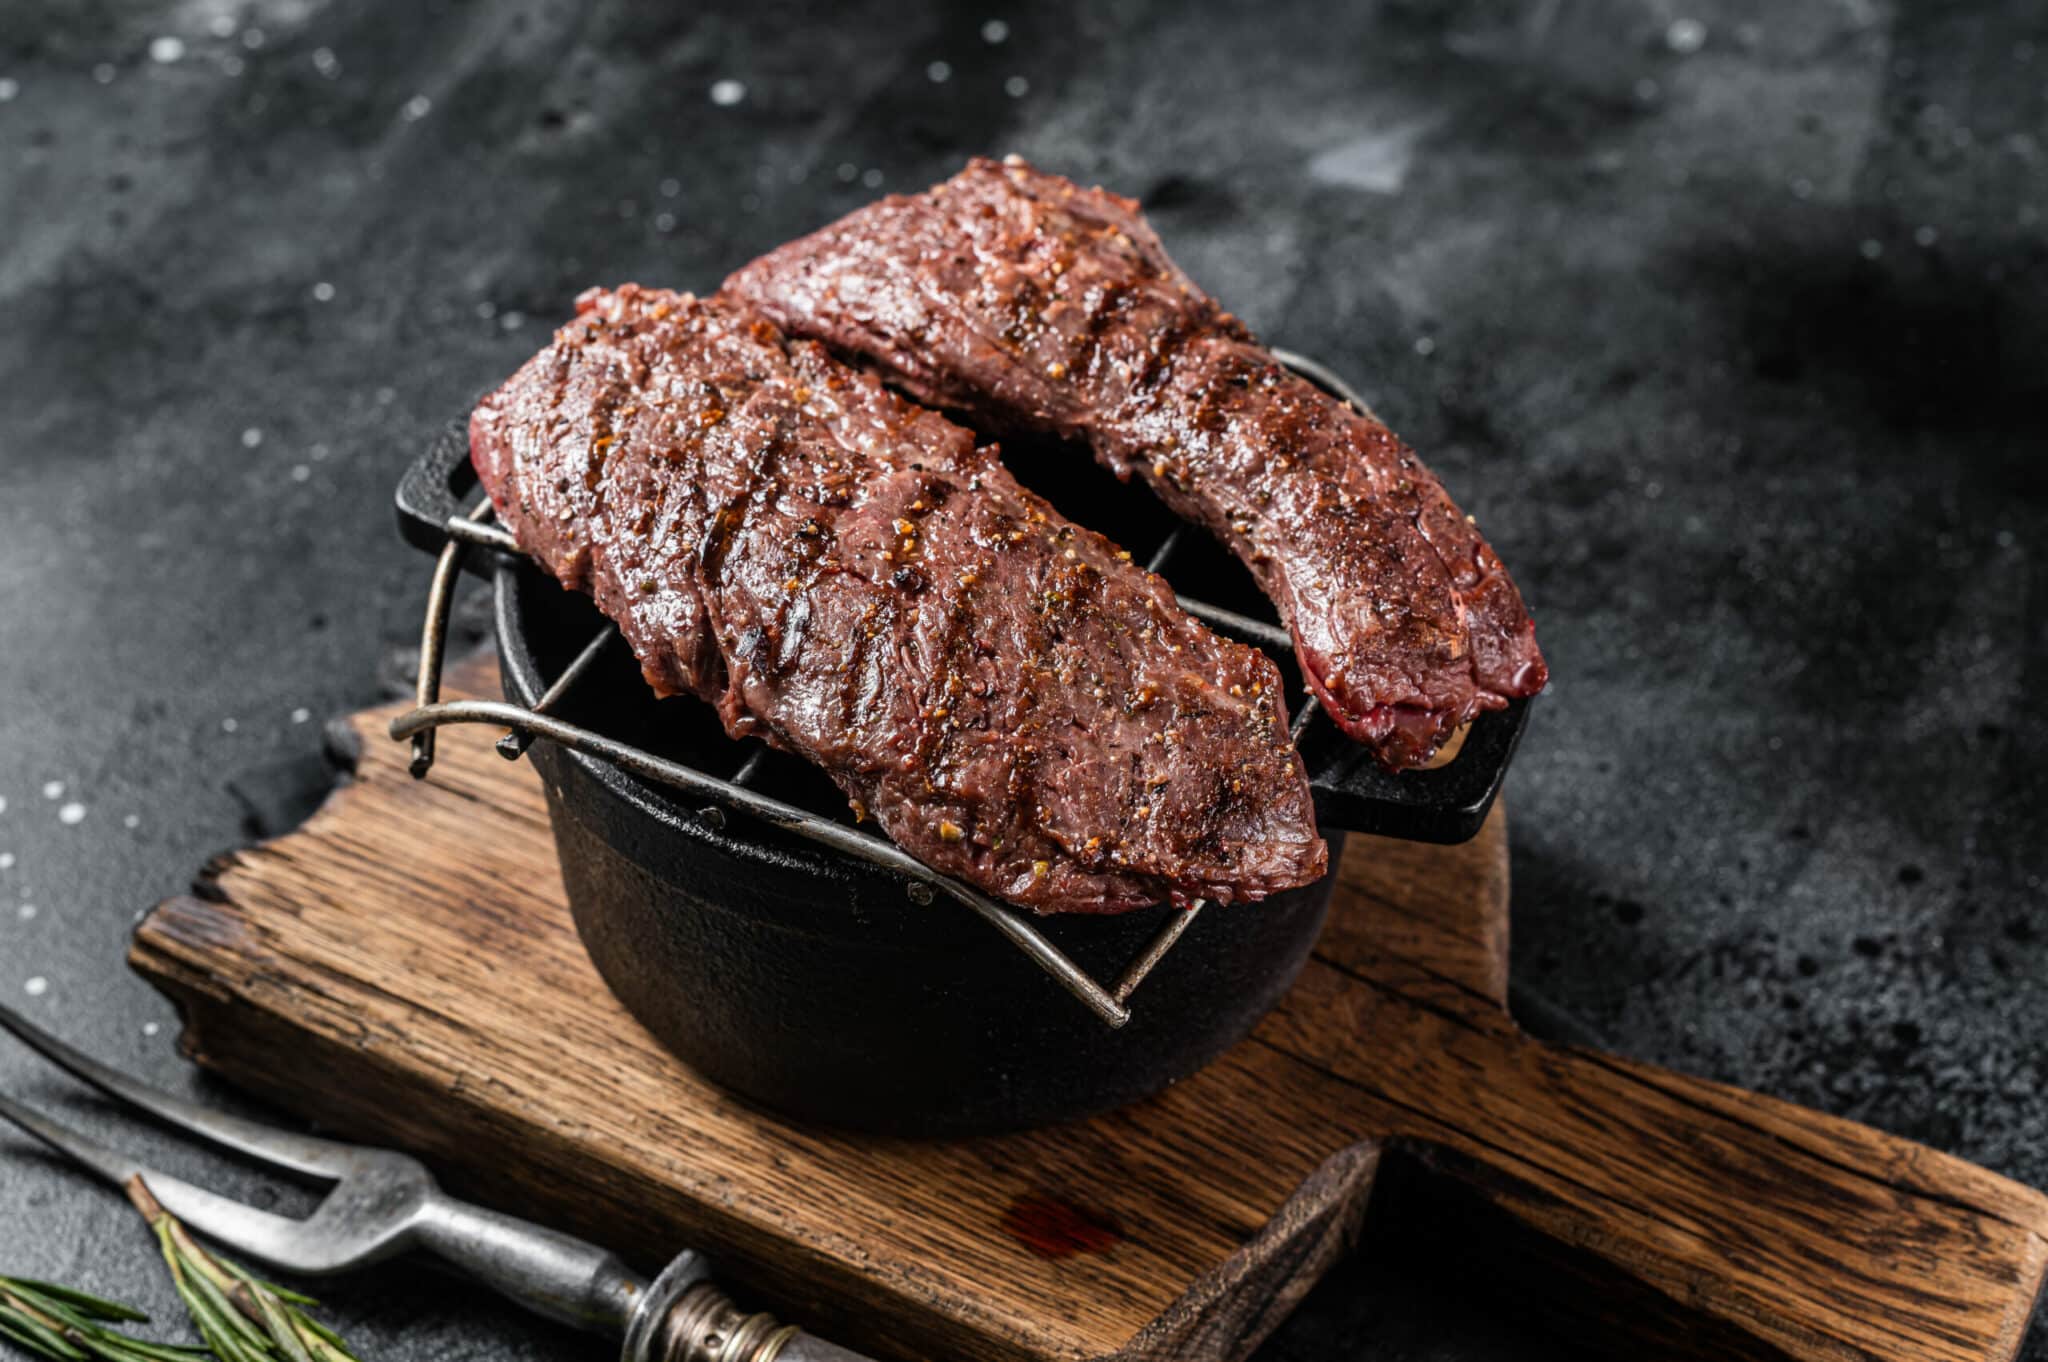 How To Cook Skirt Steak On The Stove